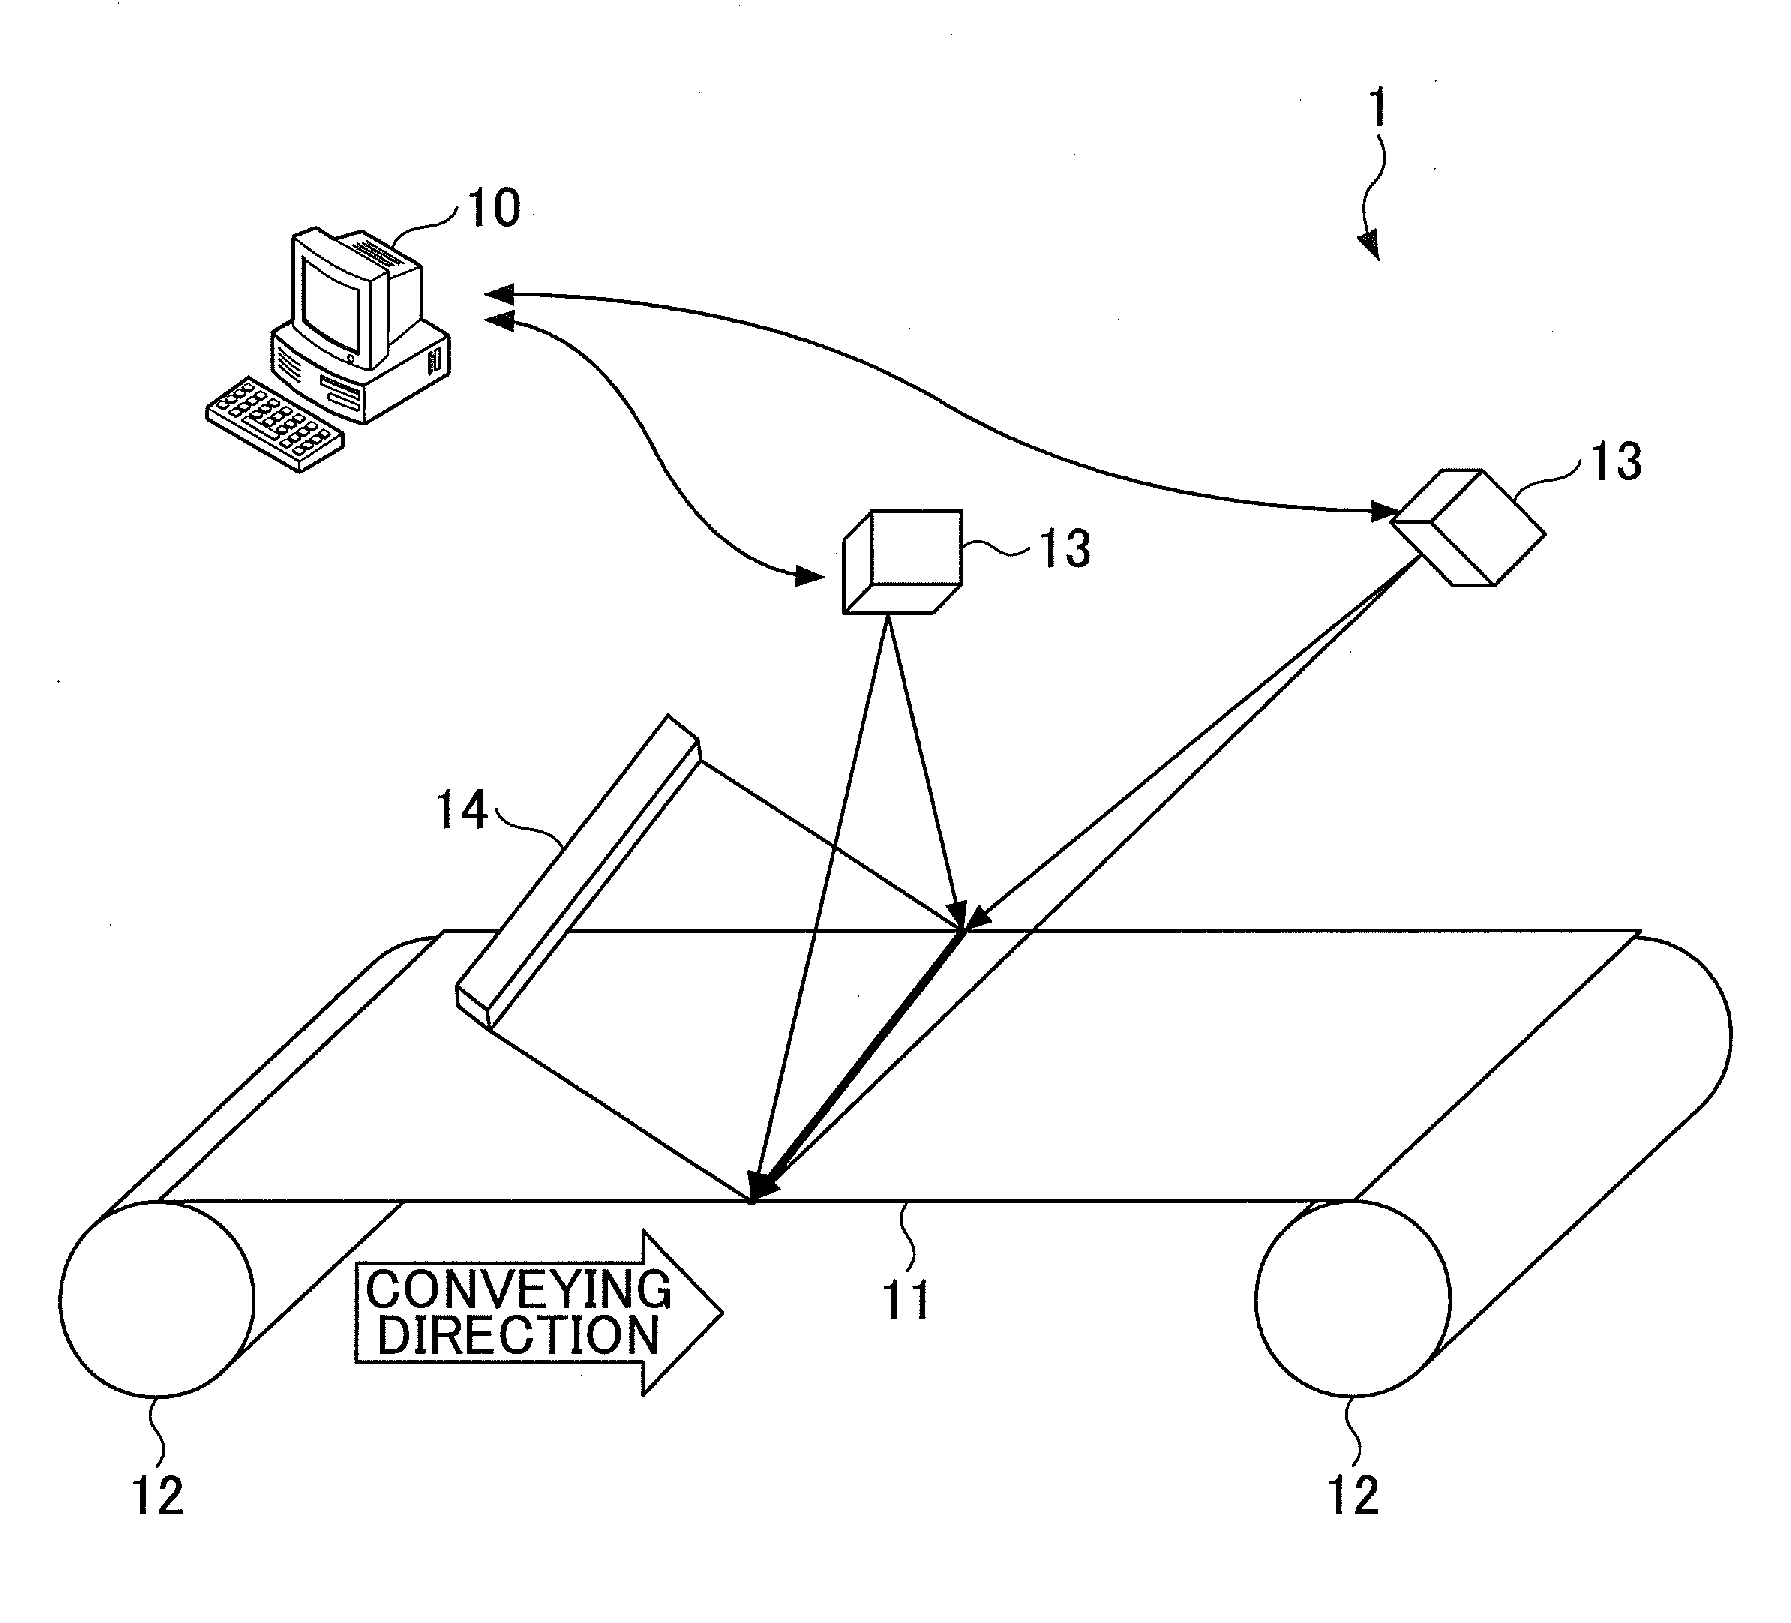 Defect inspection apparatus for inspecting sheet-like inspection object, computer-implemented method for inspecting sheet-like inspection object, and defect inspection system for inspecting sheet-like inspection object